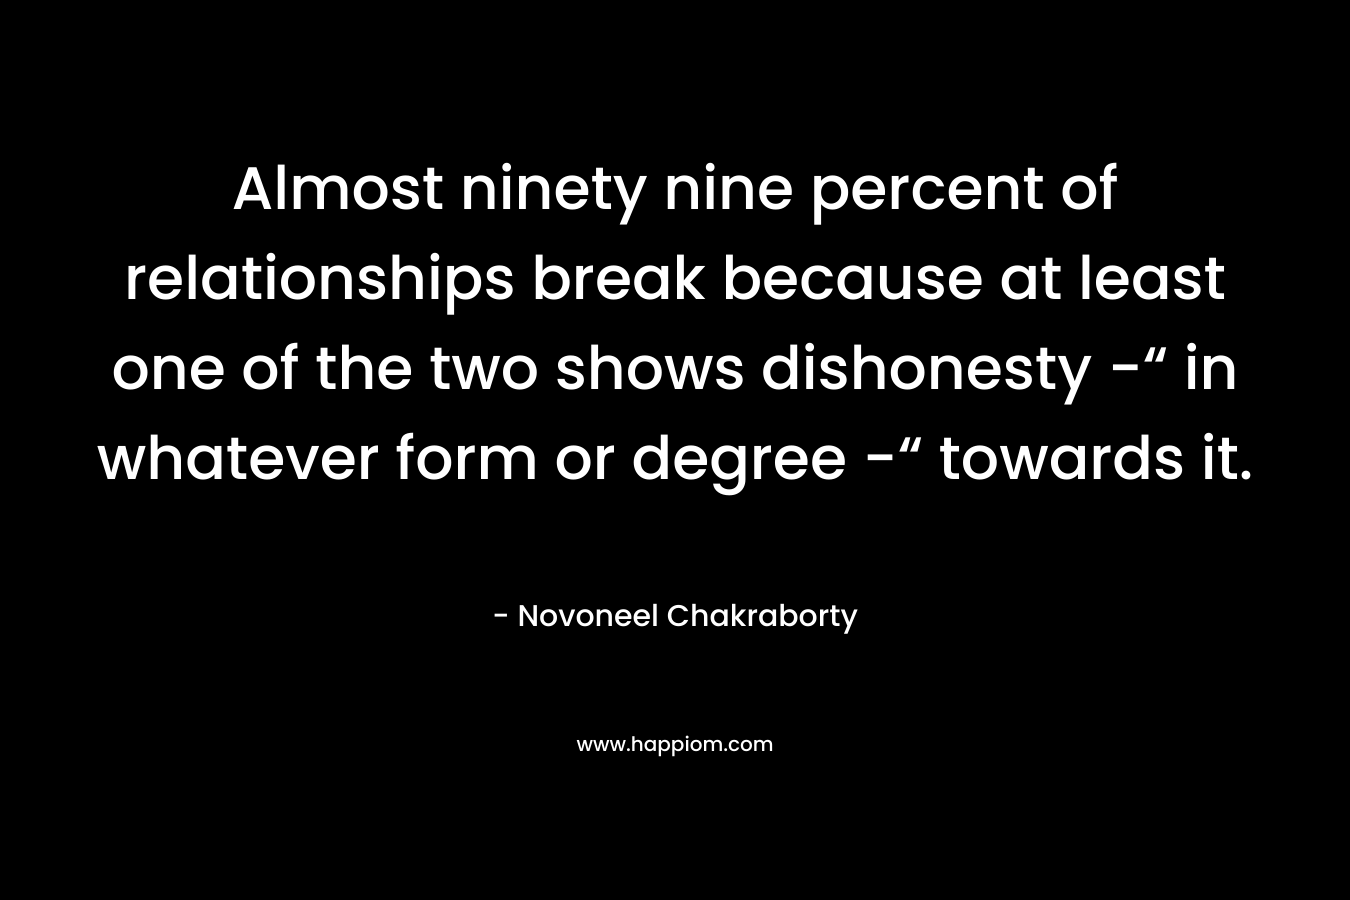 Almost ninety nine percent of relationships break because at least one of the two shows dishonesty -“ in whatever form or degree -“ towards it. – Novoneel Chakraborty